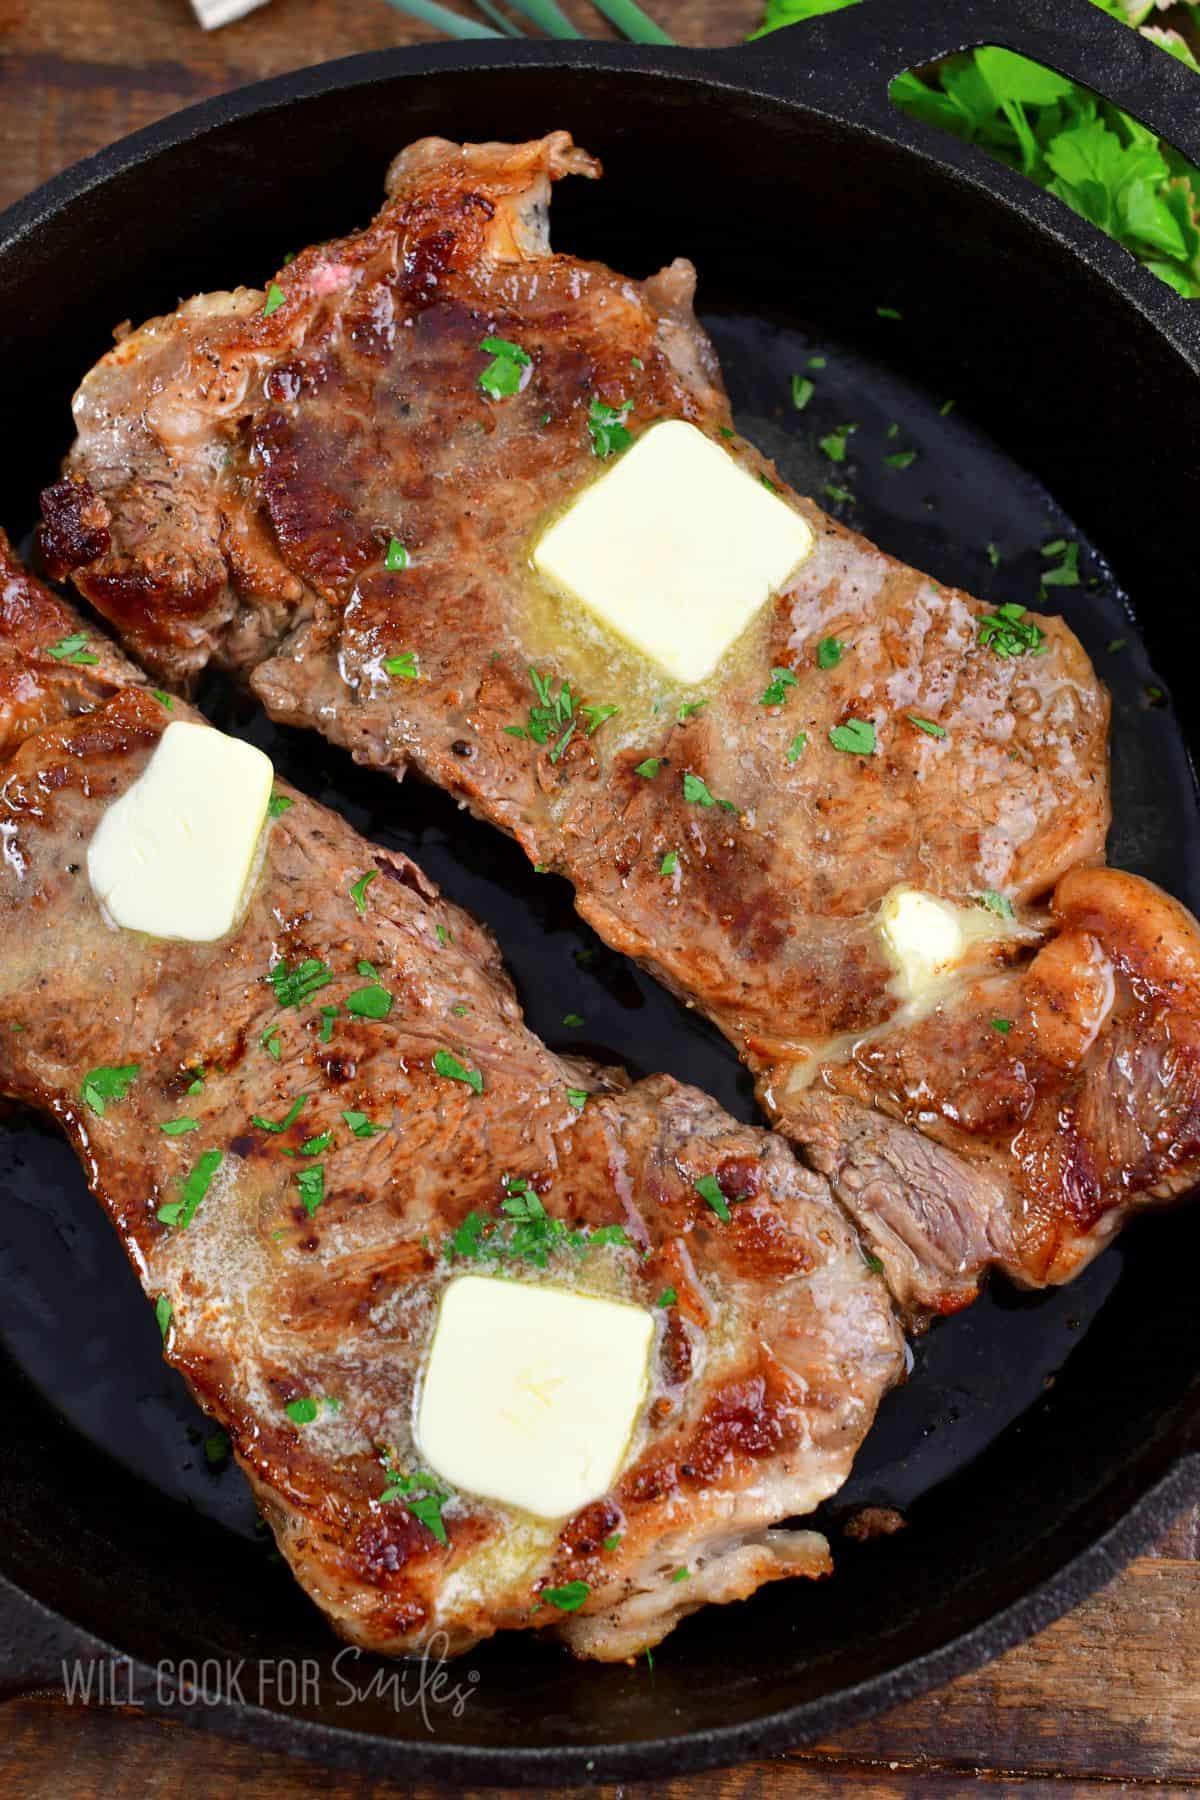 How To Cook A Well-Done Steak So It's Tender and Juicy (Recipe)